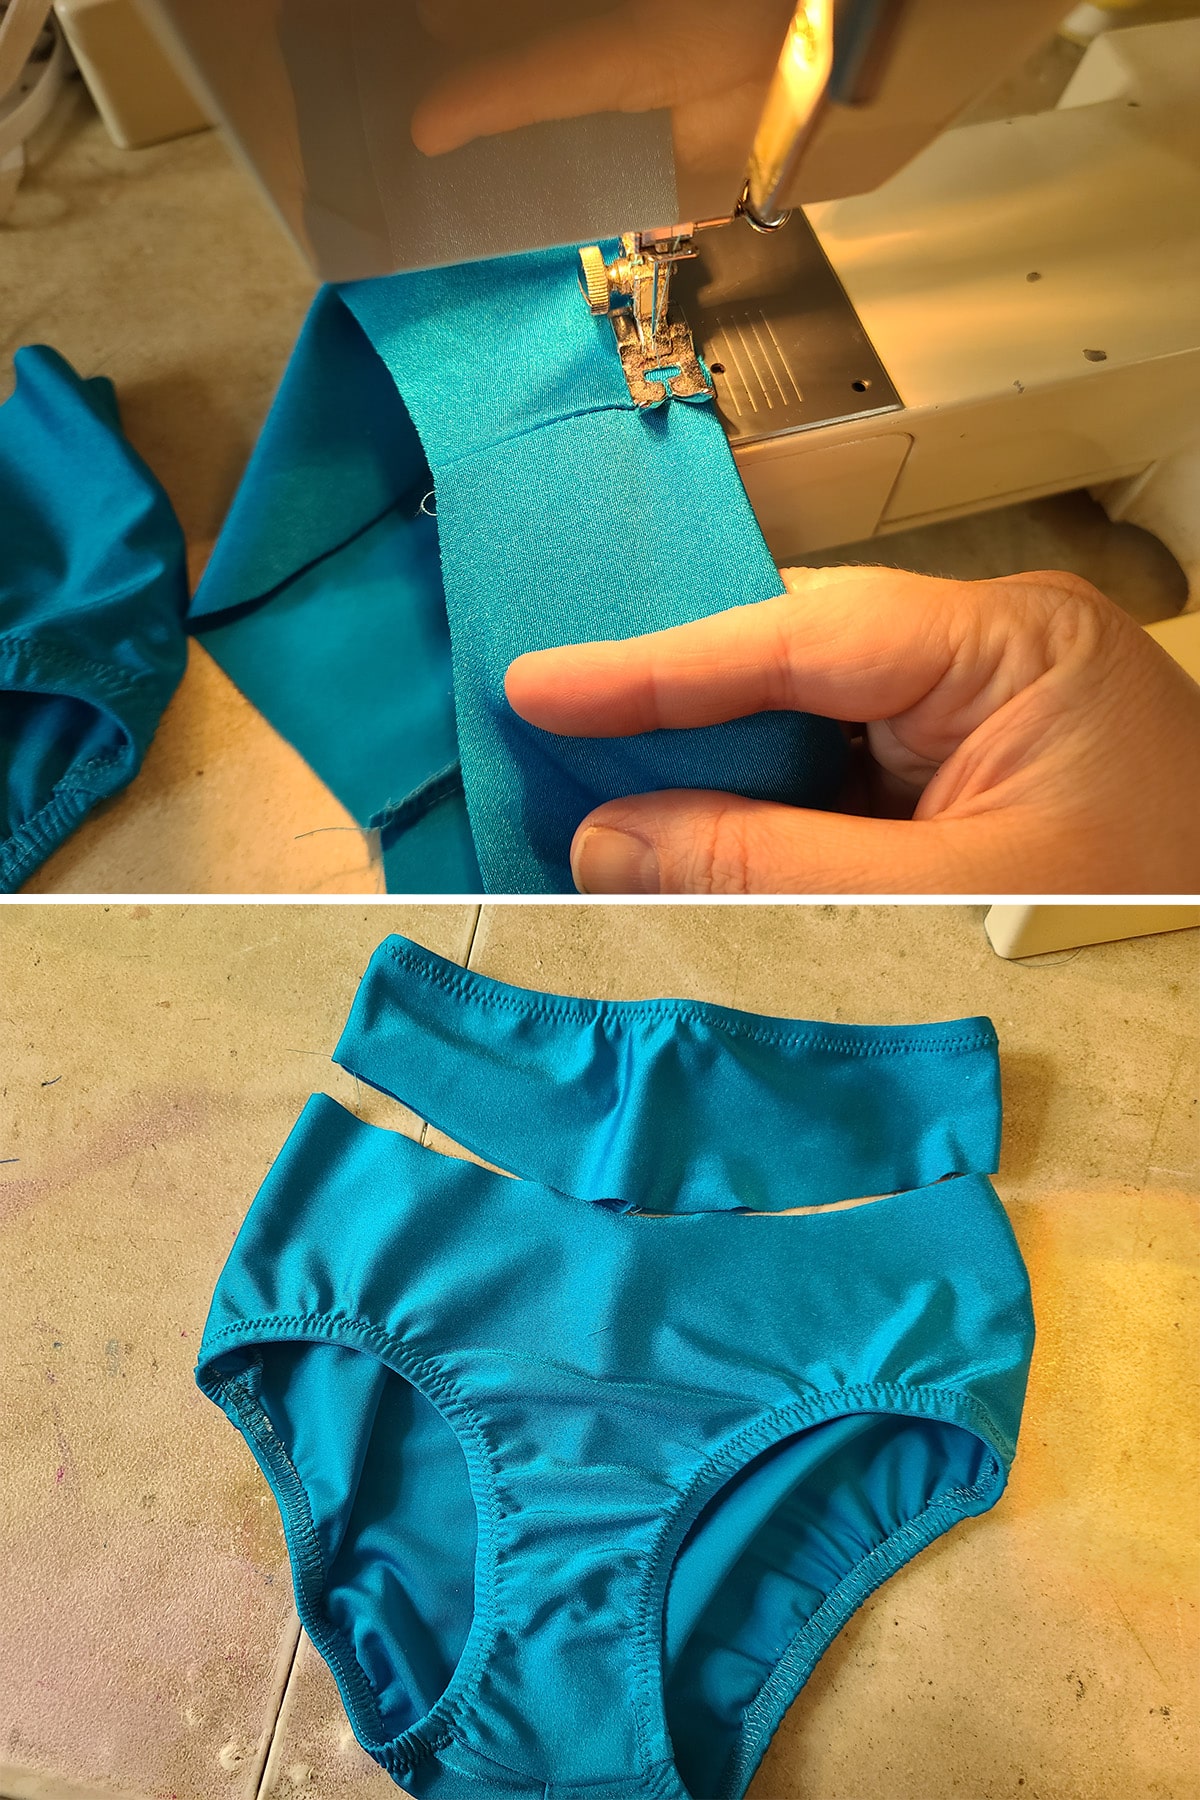 A 2 part image showing the elastic being top stitched on the briefs and yoke of the skating skirt.